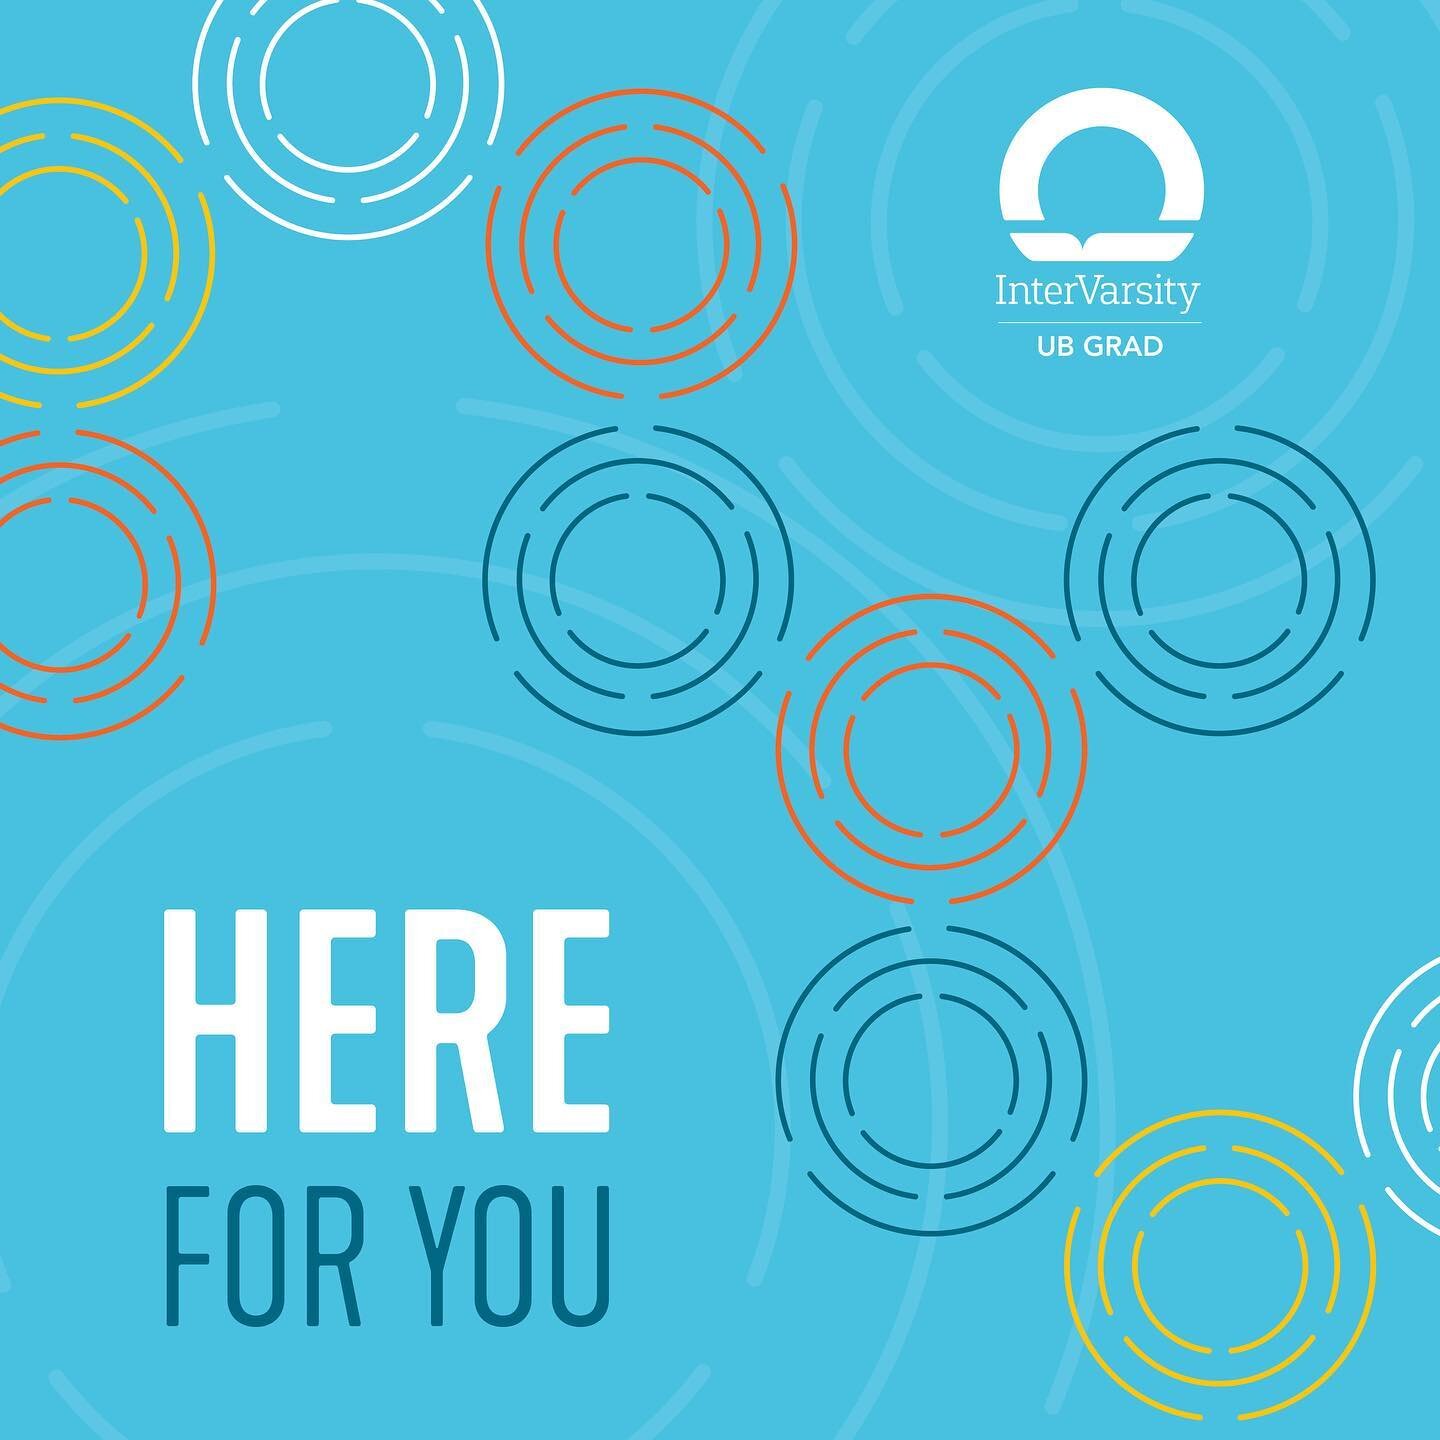 UB graduate students - we&rsquo;re here for you! Let us know how we can pray for you or help you connect as you head into this school year. 

#callingallgradstudents #intervarsitygfm #gradstudent #graduatestudent #intervarsity #christian #ubivgcf #gf